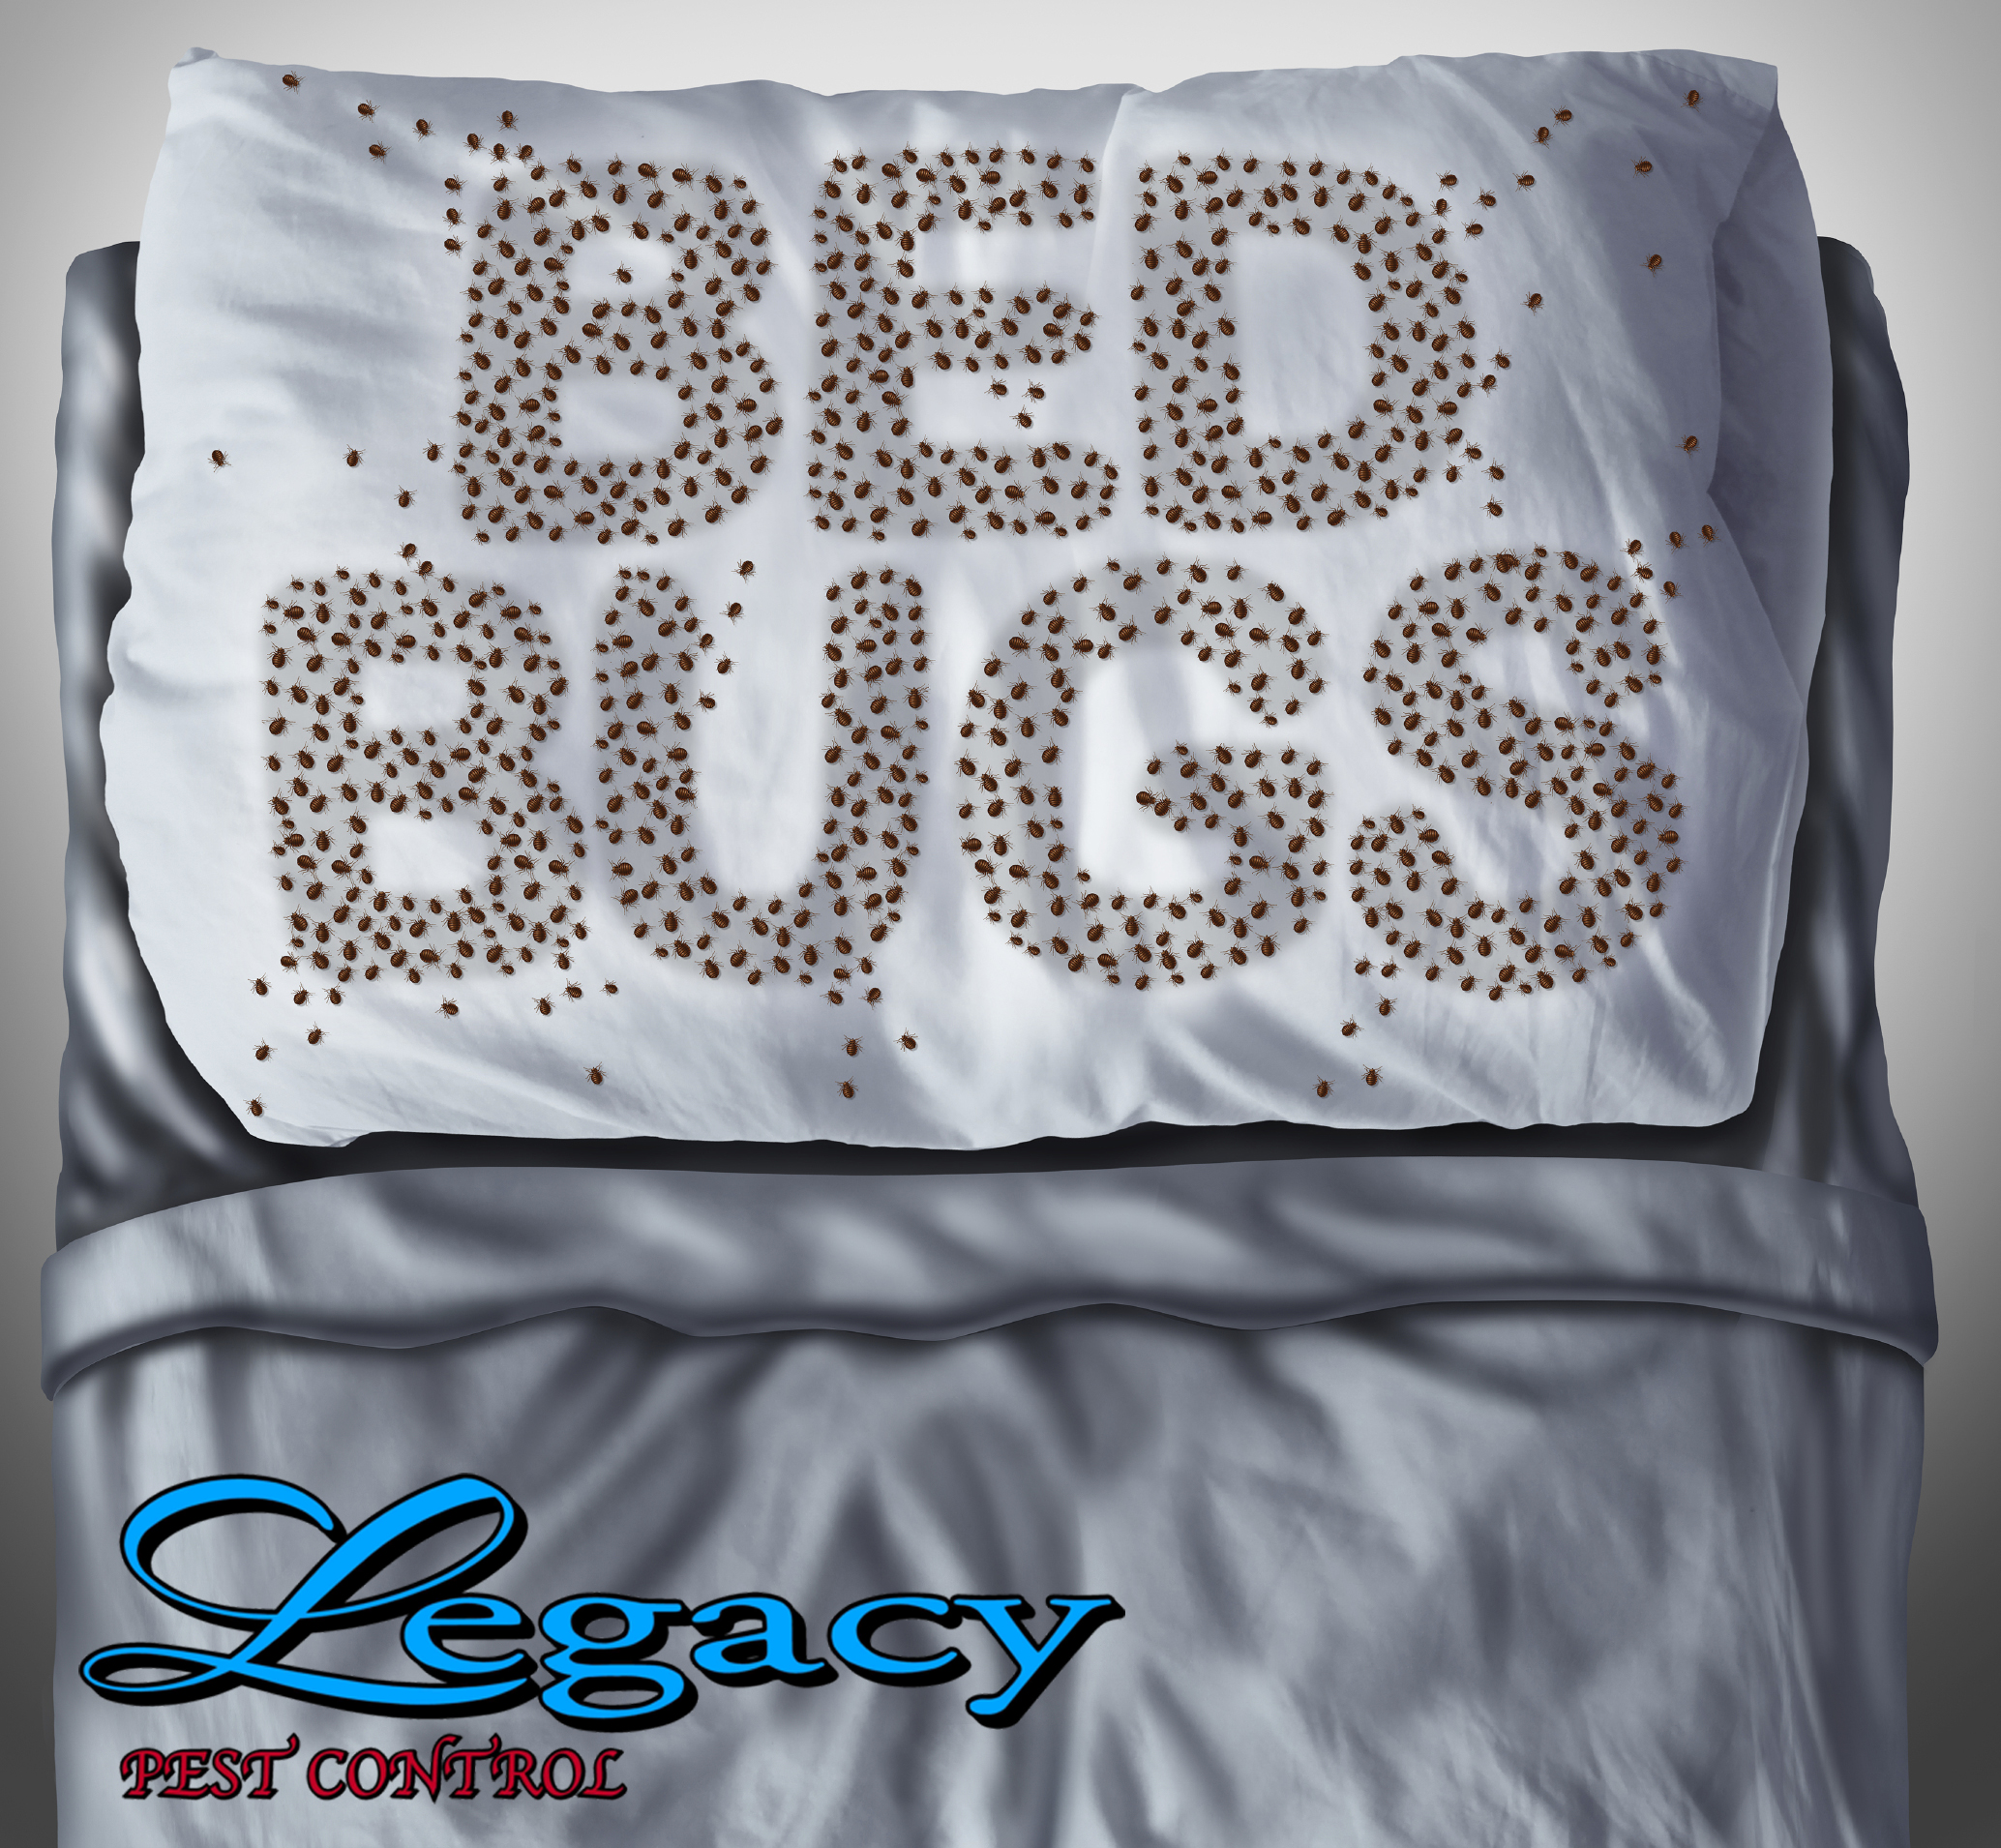 Bed-Bugs-On-Pillow-Text-Graphic